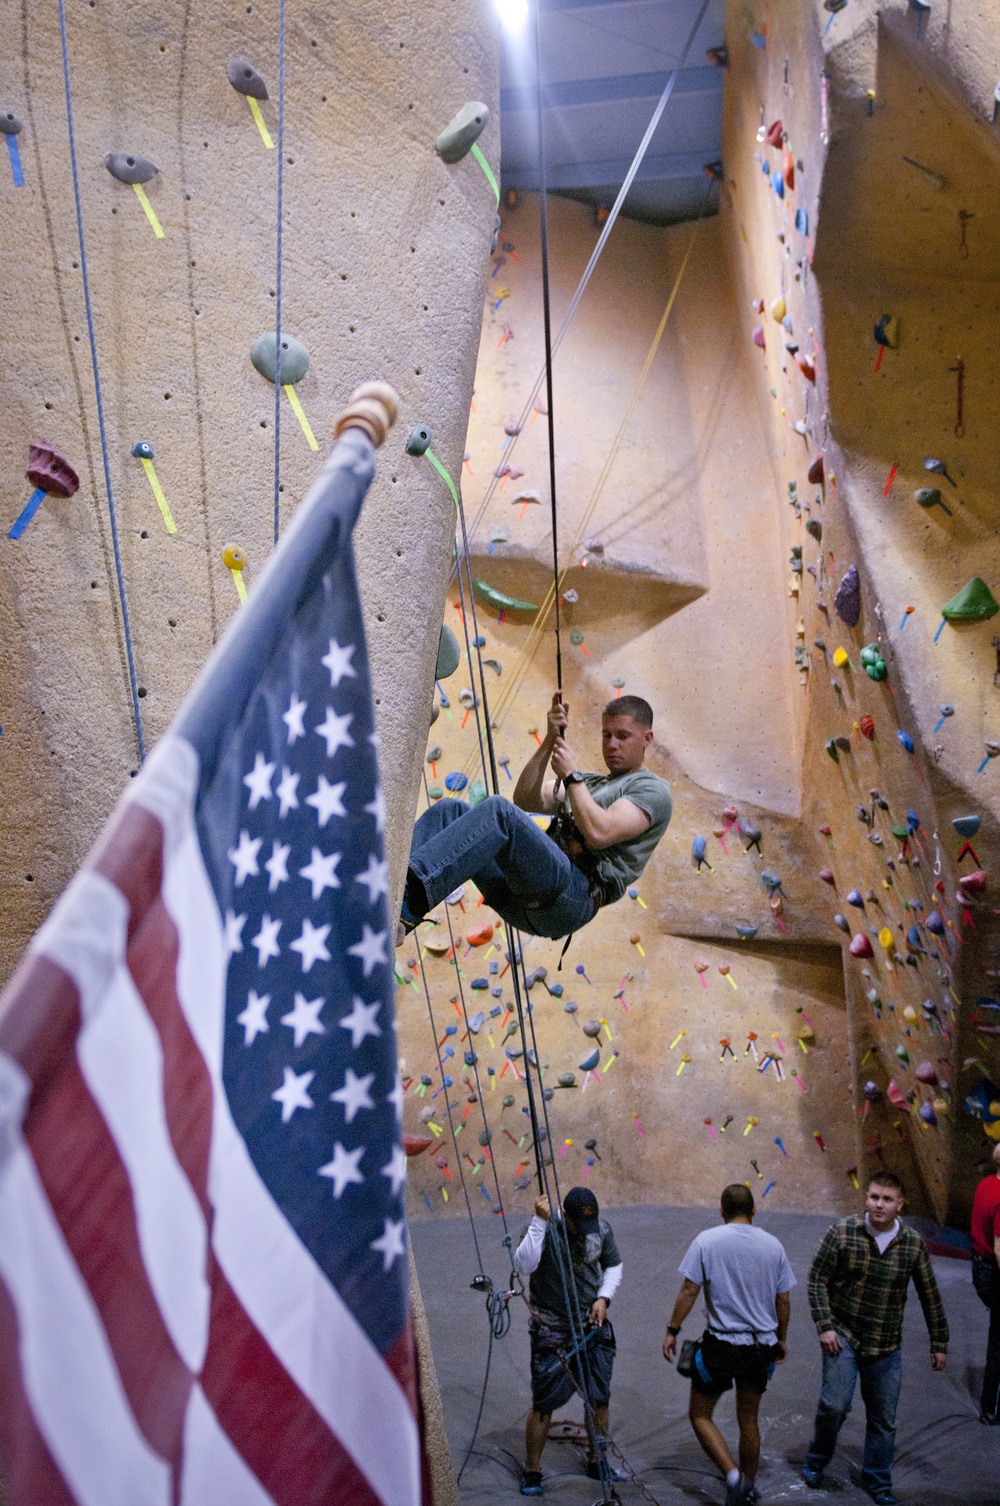 Warrior Adventure Quest introduces rock climbing as a resiliency tool for soldiers